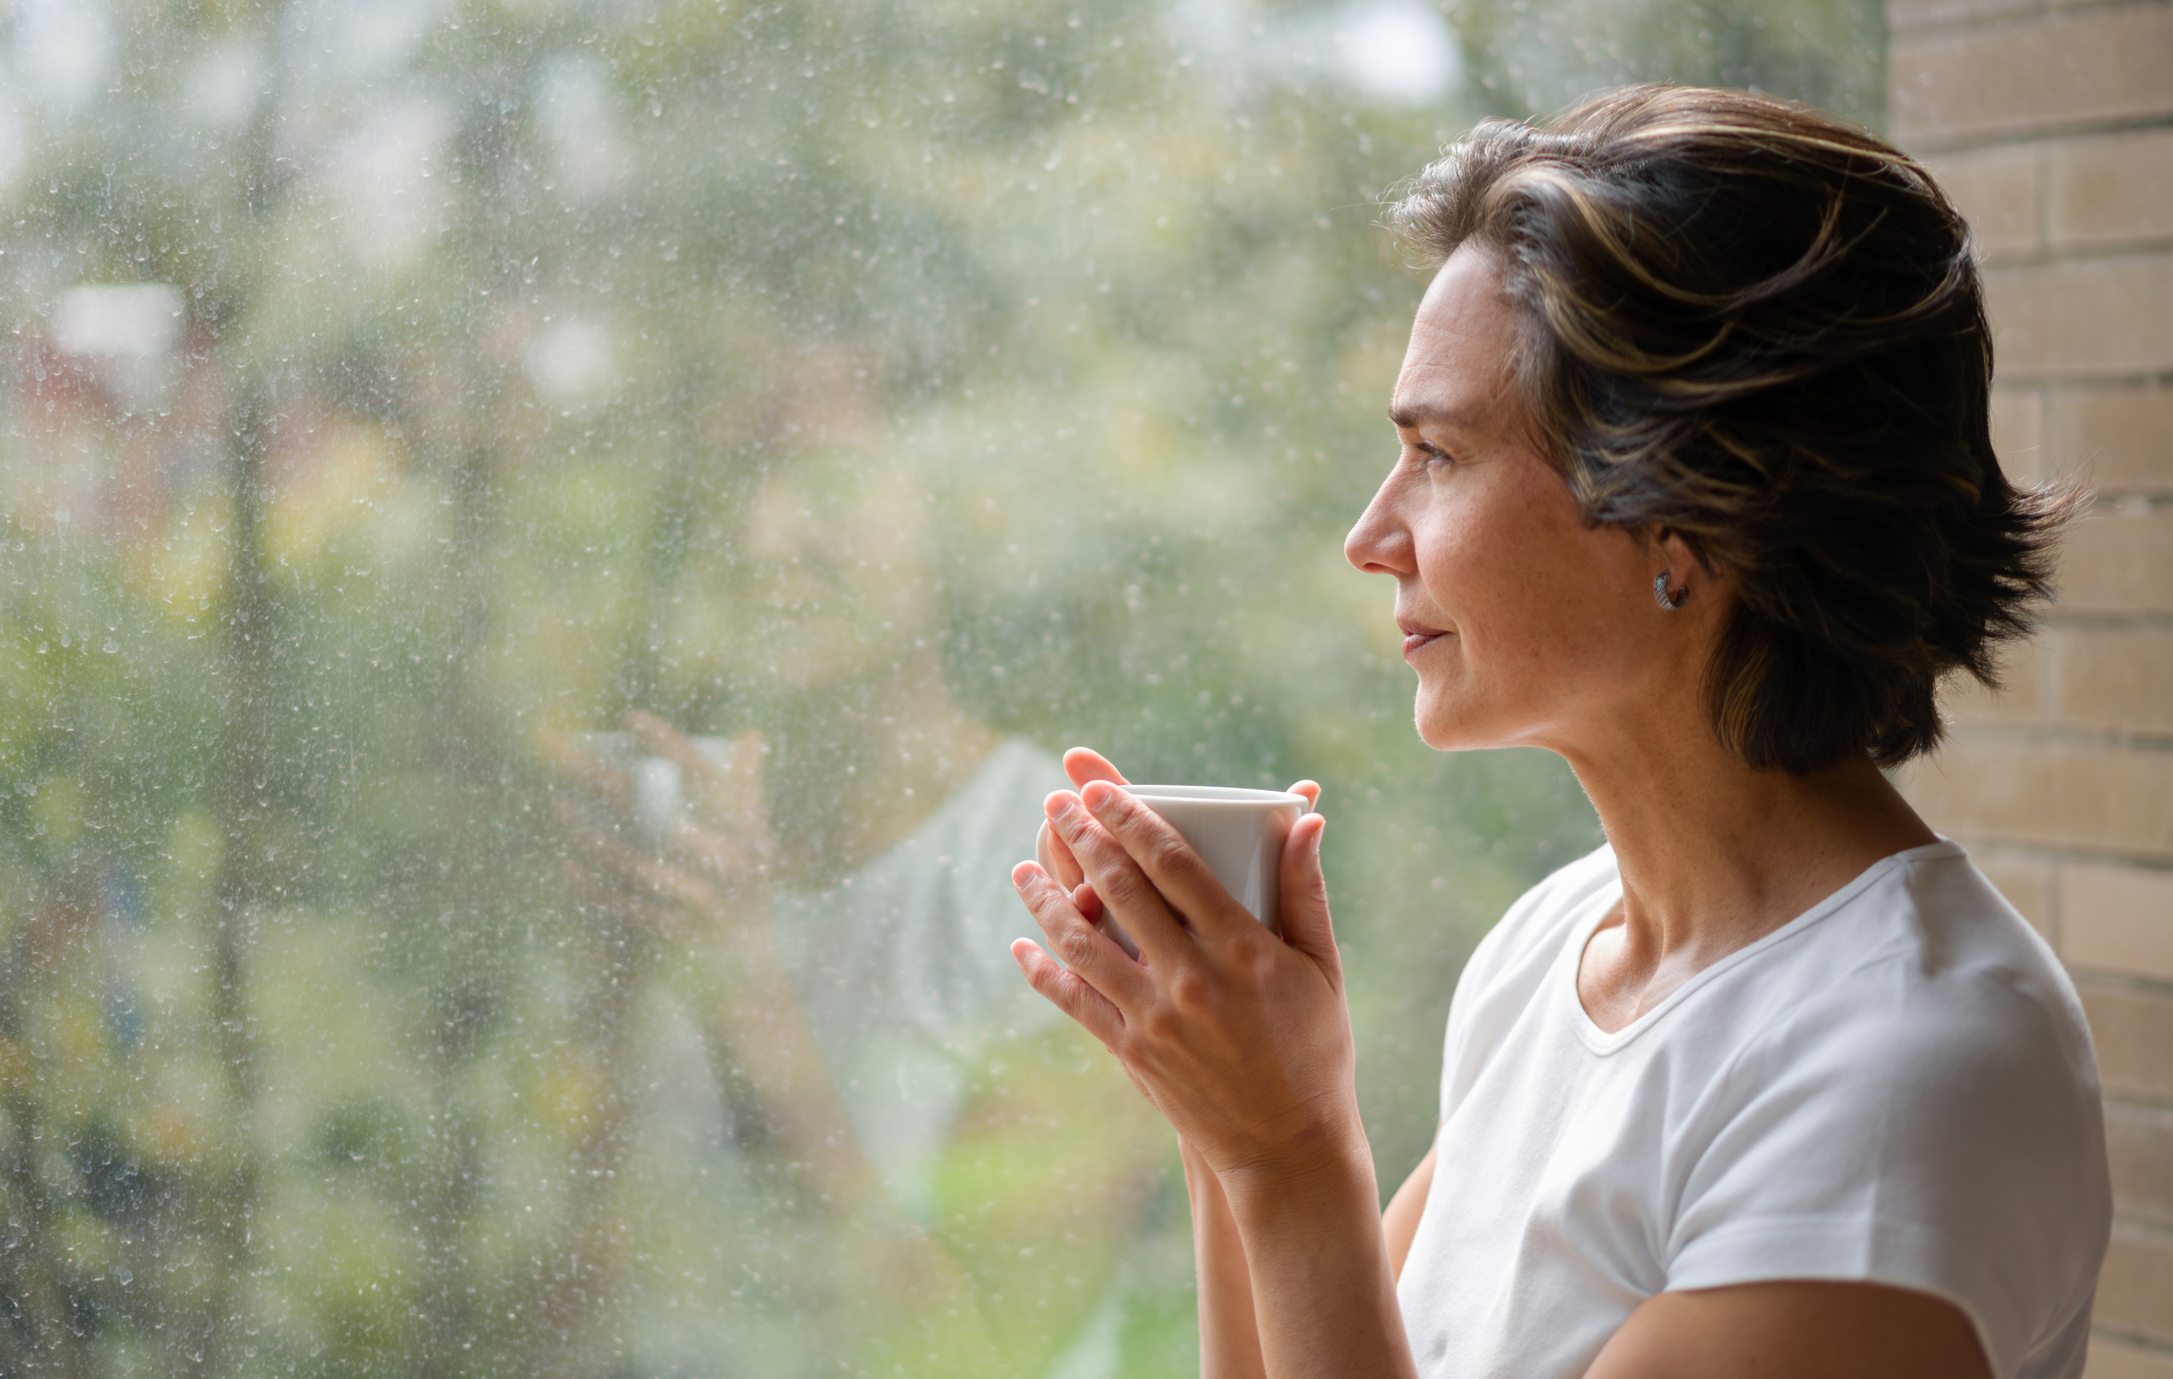 Thoughtful senior woman looking out the window wondering whether she should pursue an ADHD diagnosis as an older adult after age 50